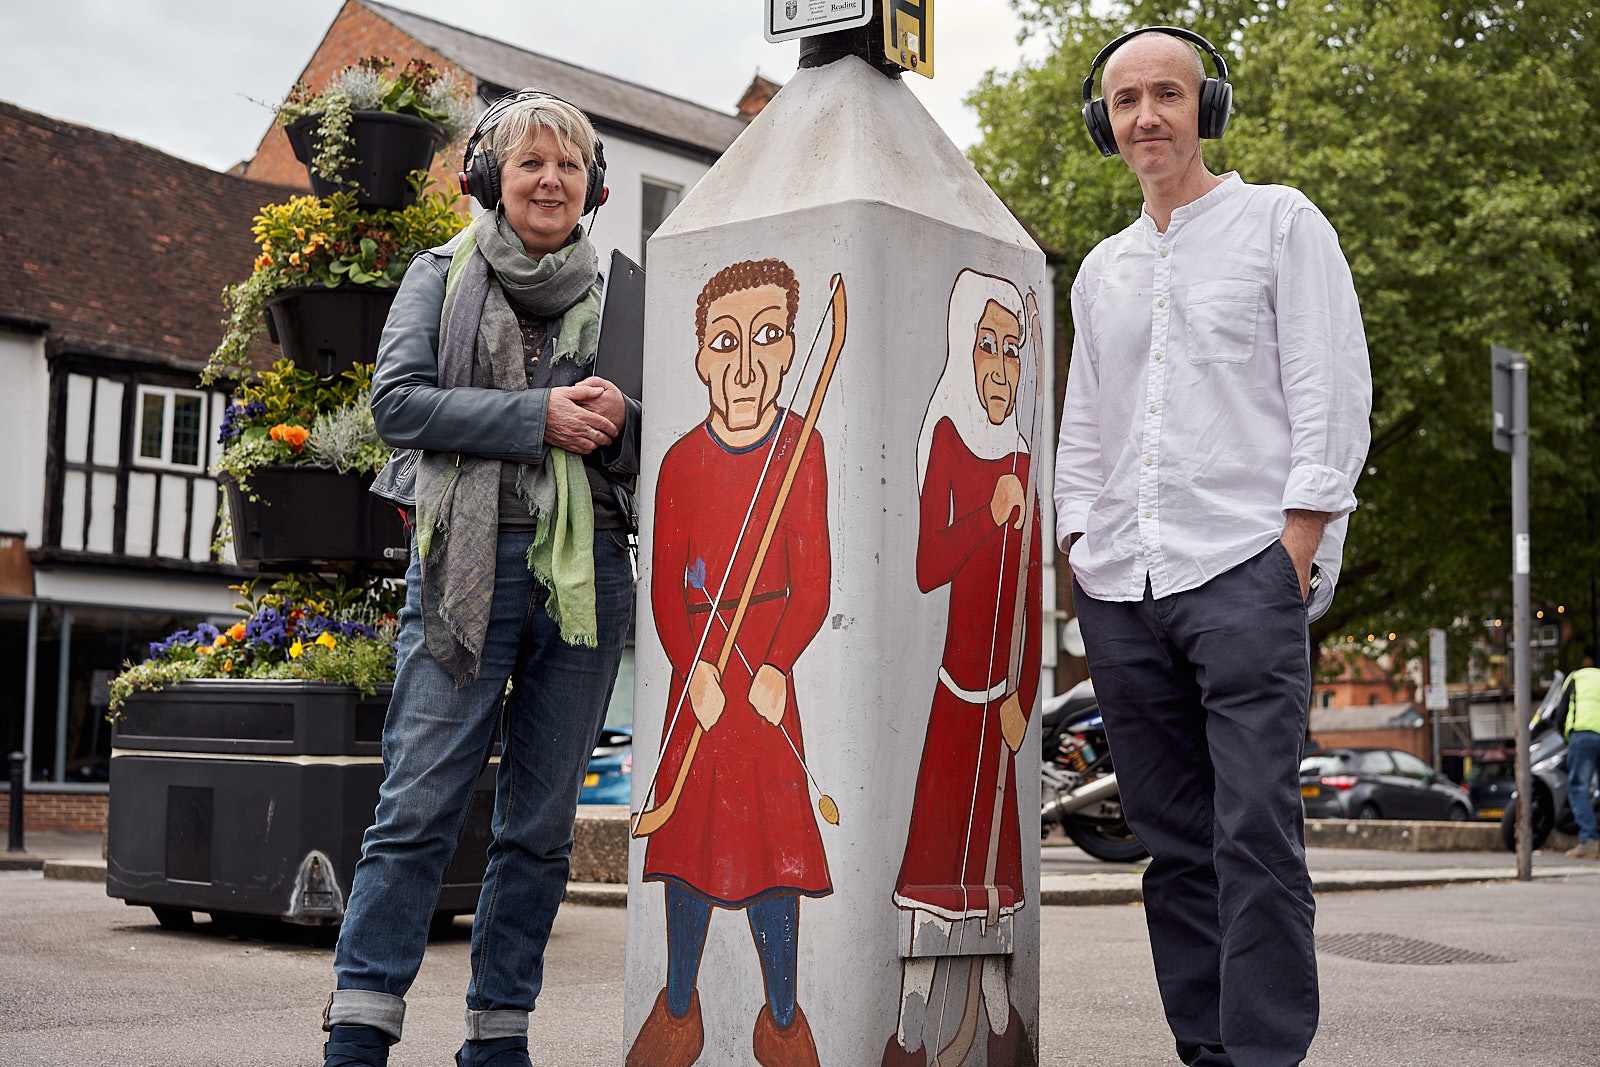 Fional Talkington and Richard Bentley stand beside decorated lamp post on St Mary's Butts